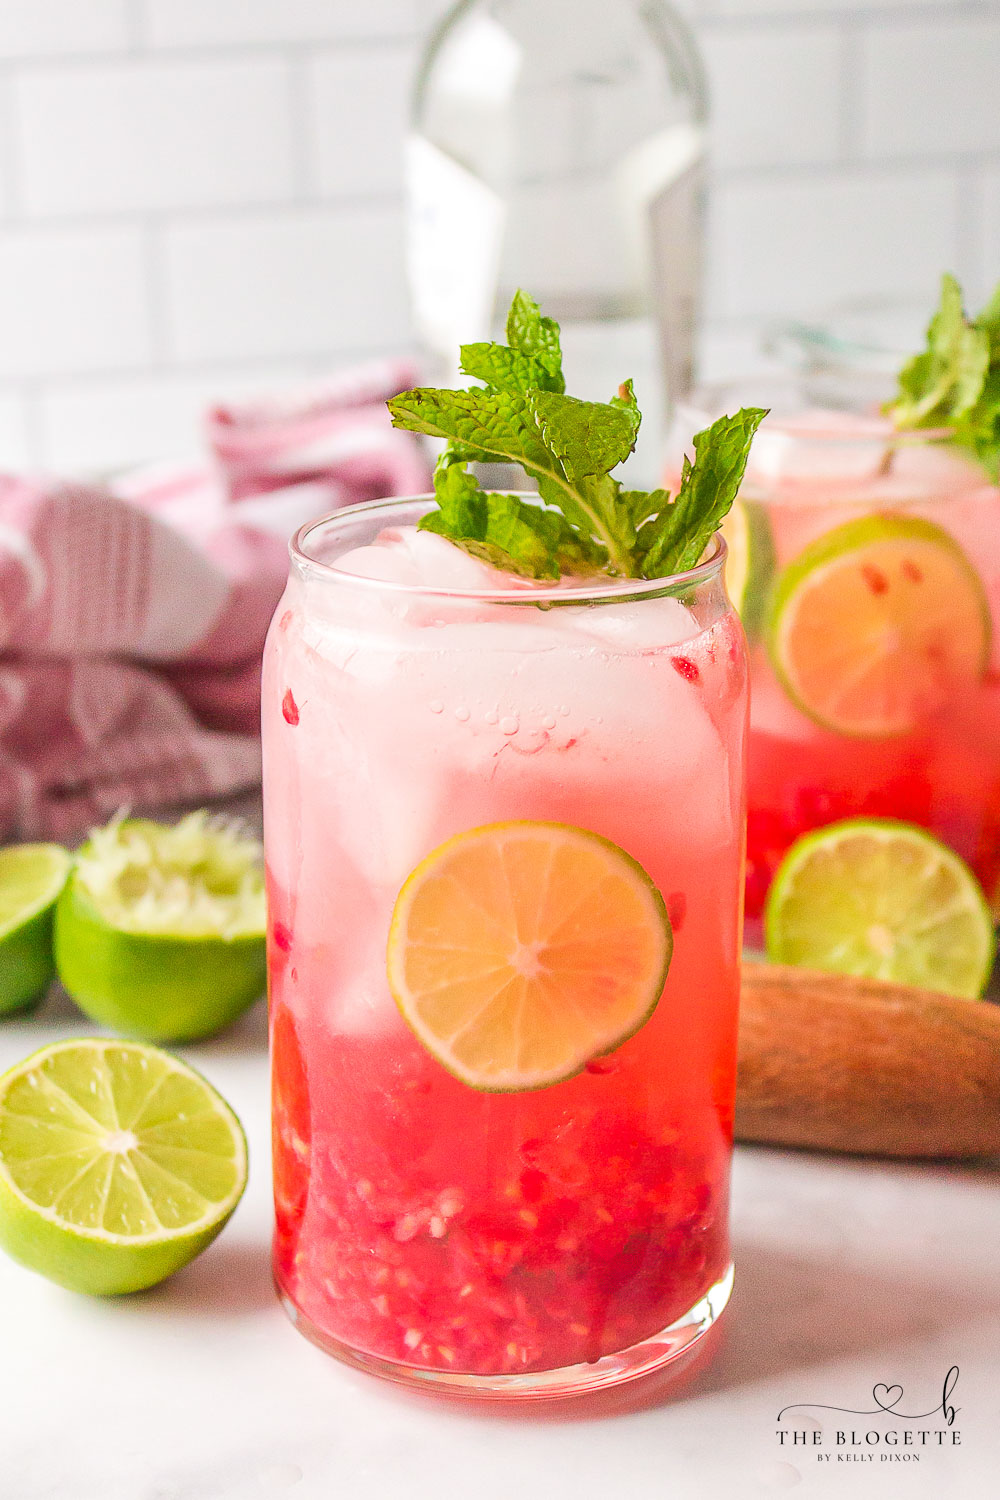 This Raspberry Mojito looks and tastes like summer! With the classic combination of lime and mint with the sweet taste of juicy raspberries.